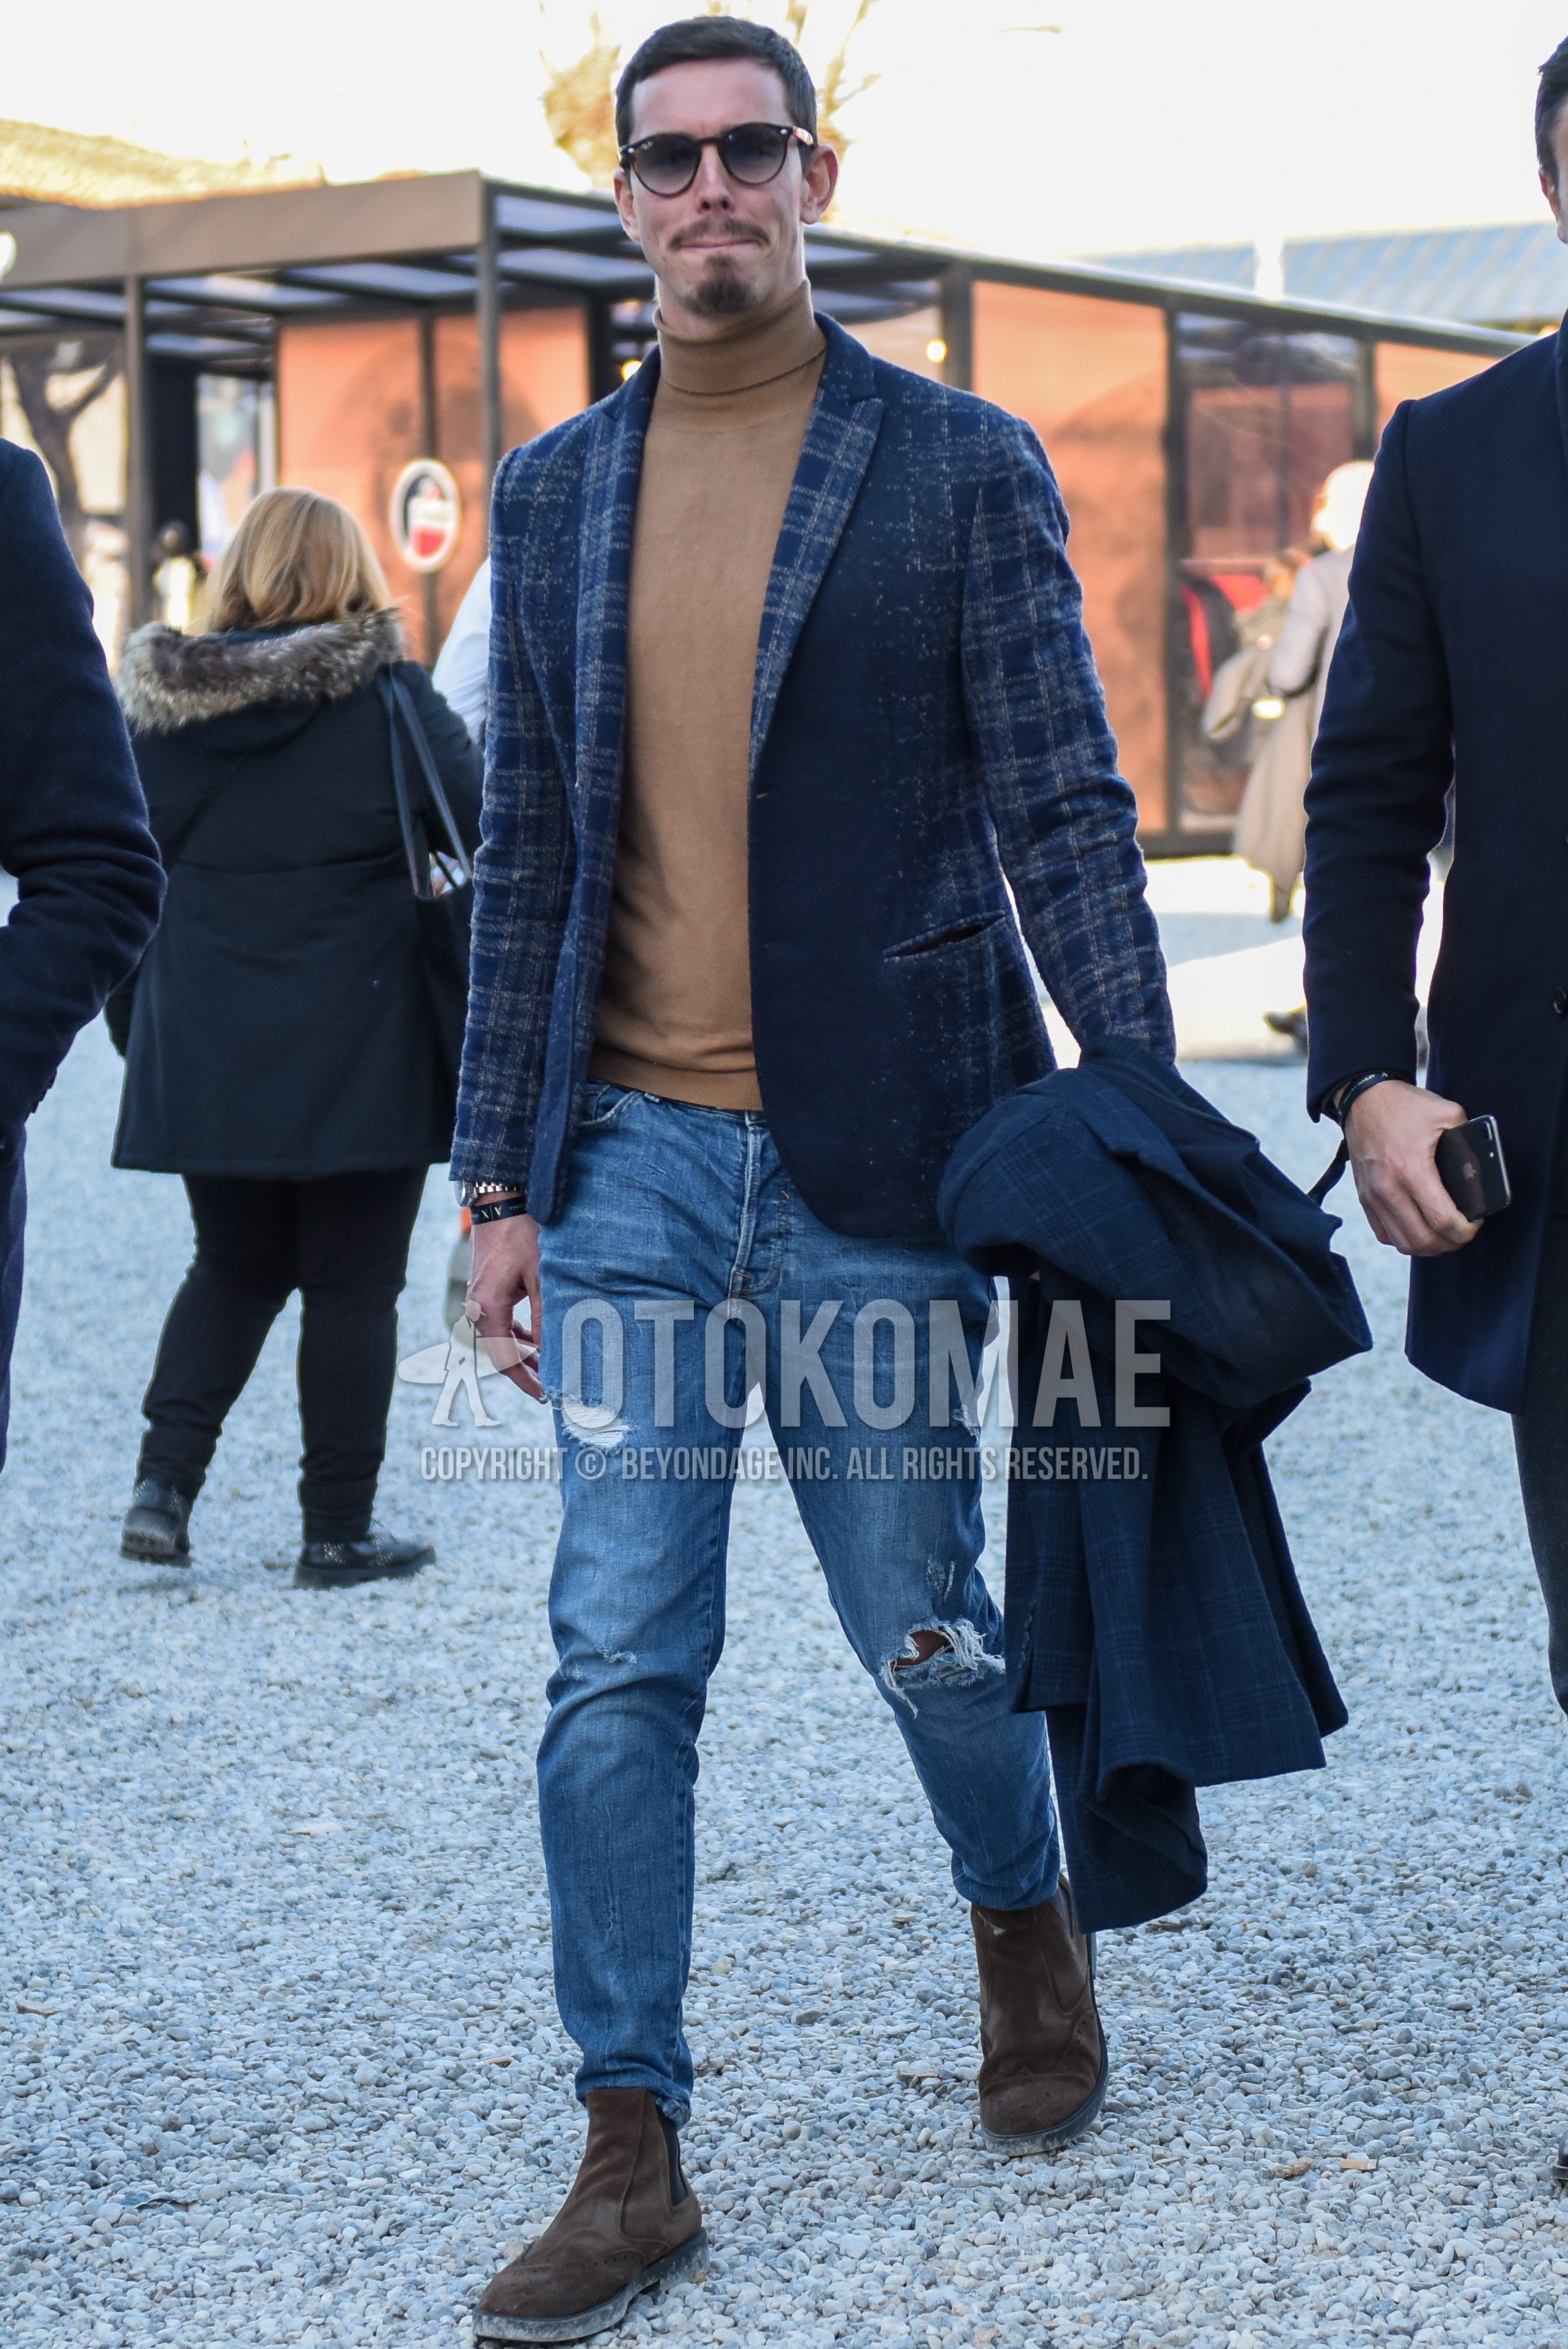 Men's spring autumn outfit with brown tortoiseshell sunglasses, gray check tailored jacket, beige plain turtleneck knit, blue plain damaged jeans, brown side-gore boots.